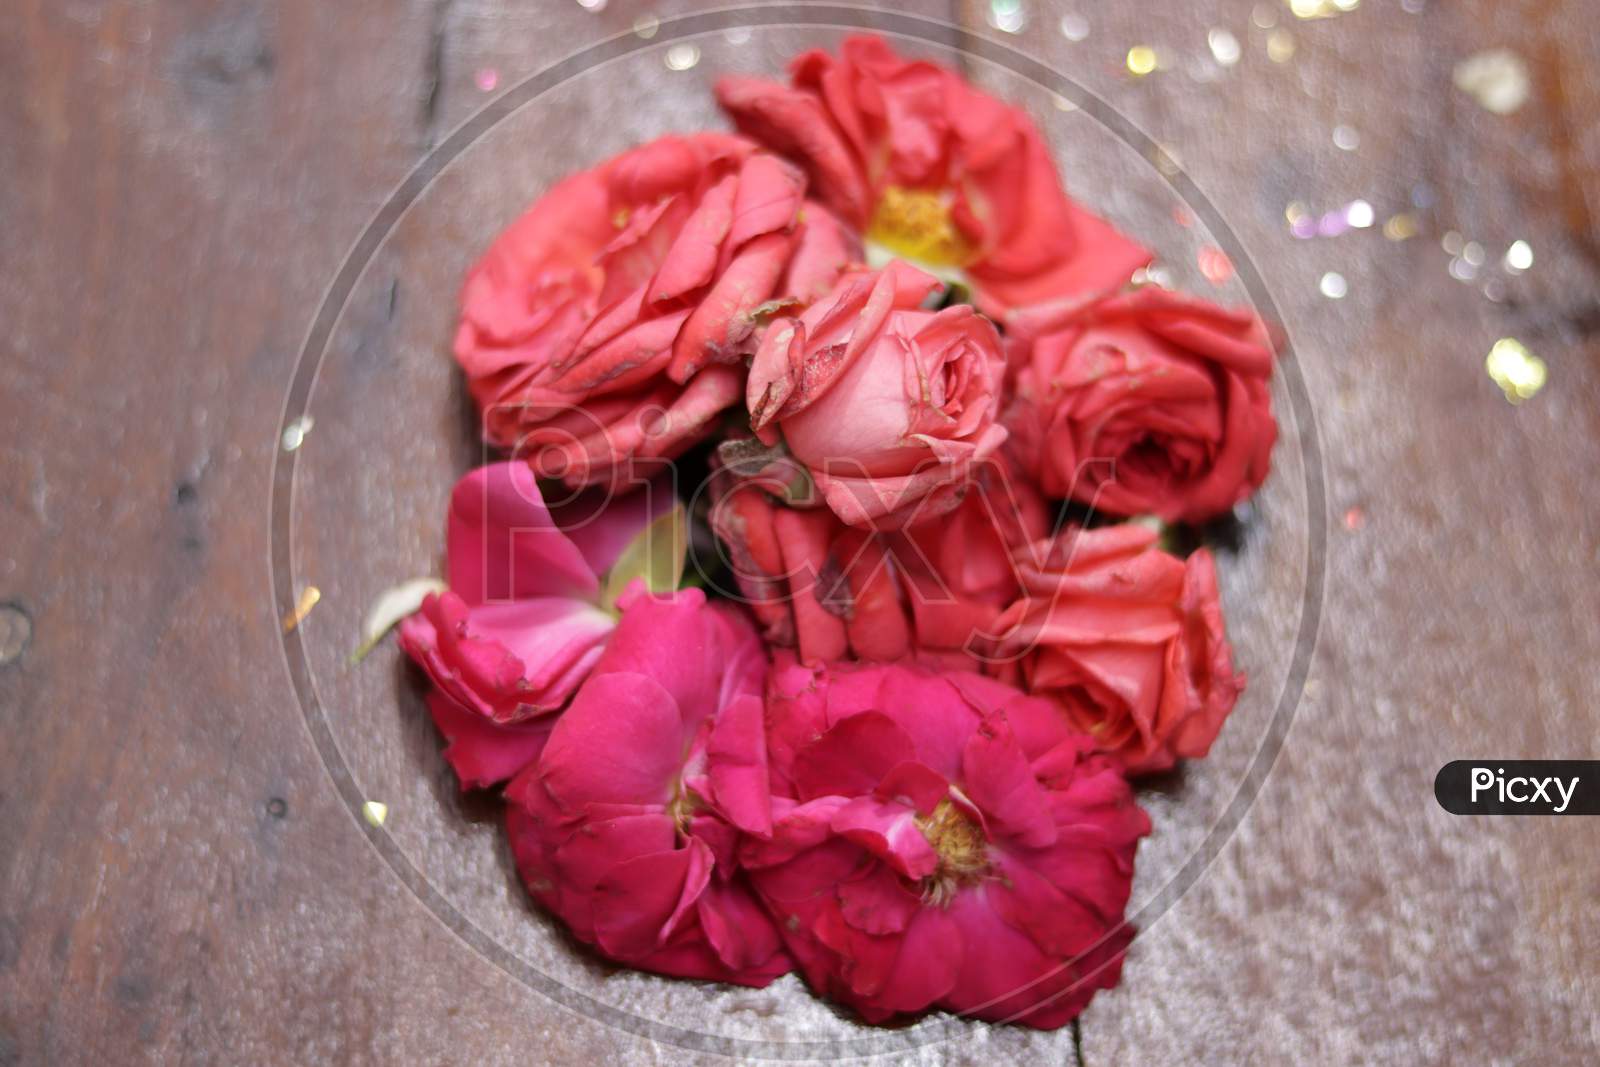 Pink rose flowers on wood background